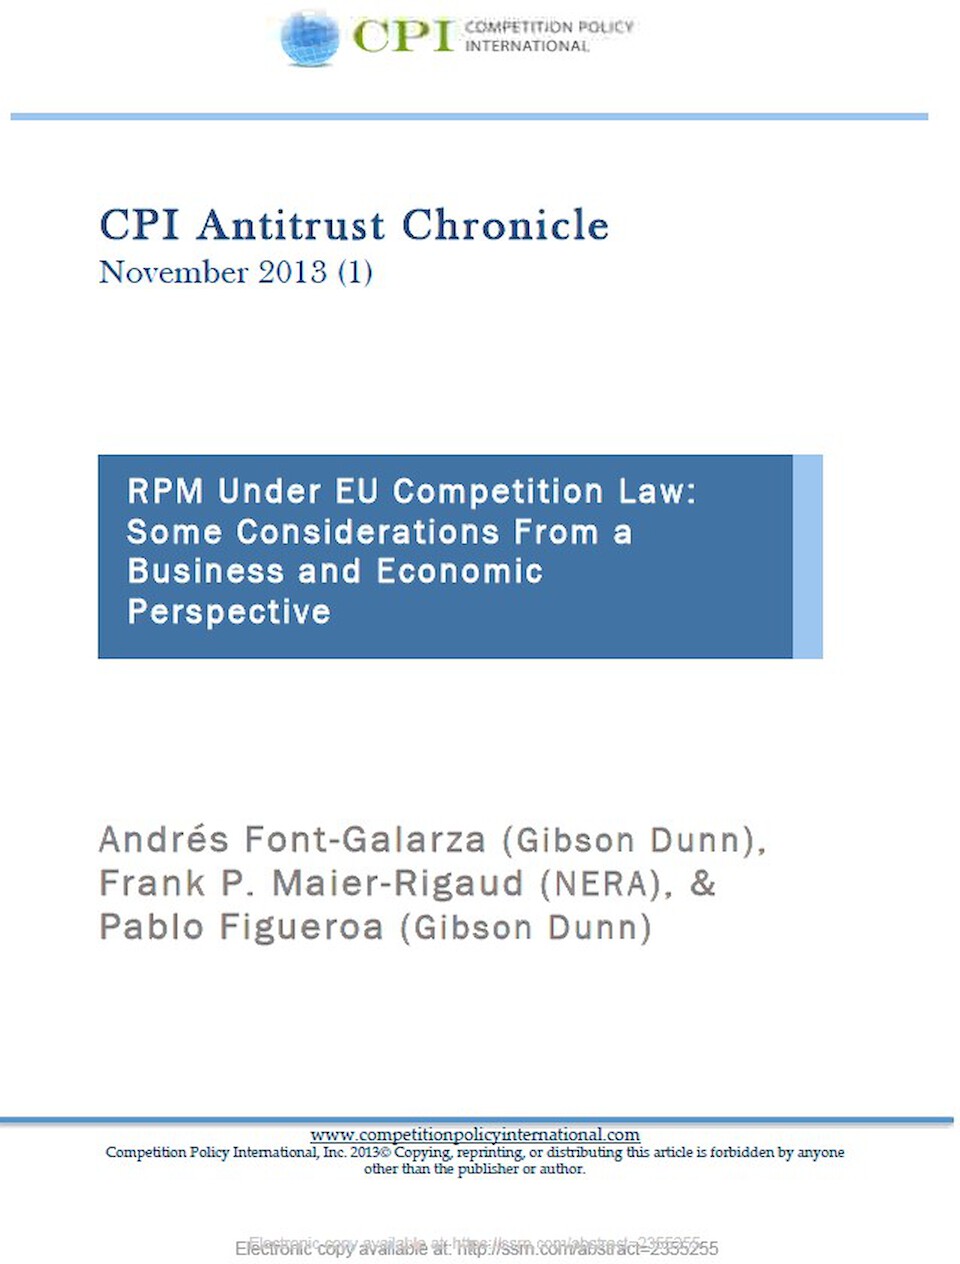 RPM Under EU Competition Law: Some Considerations from a Business and Economic Perspective